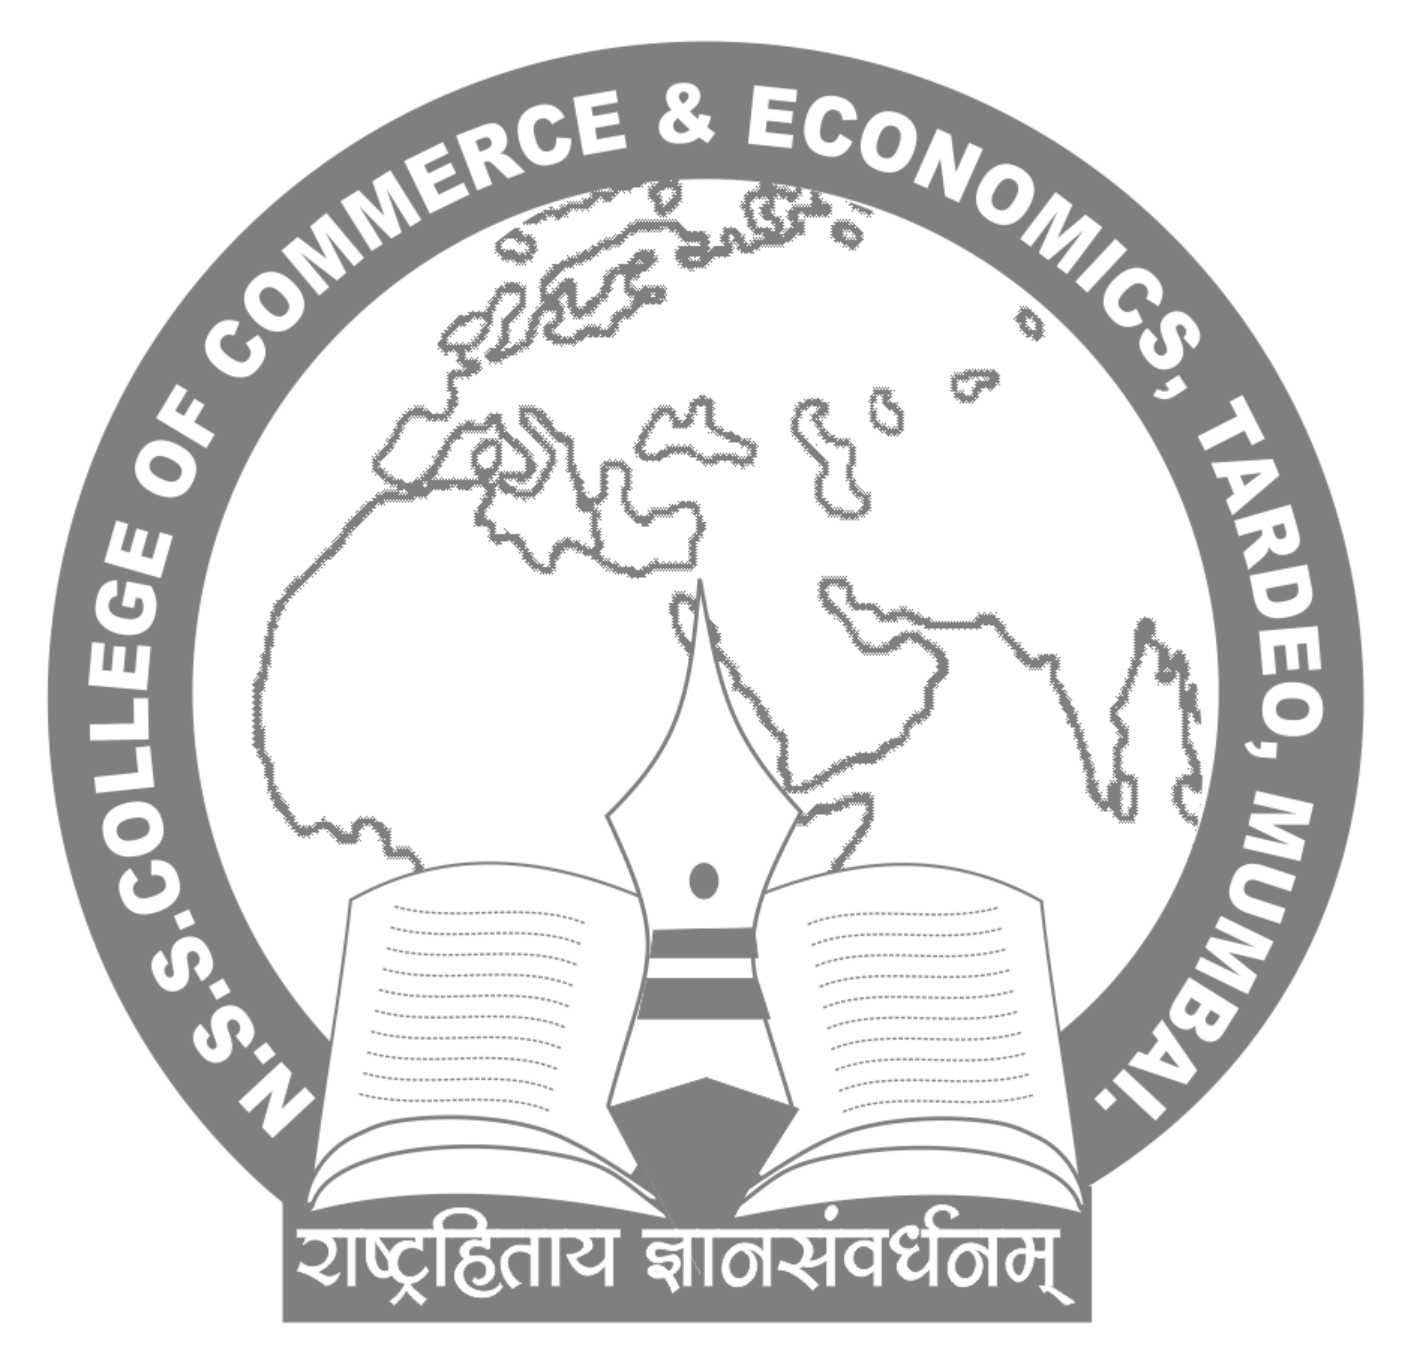 NSS COLLEGE OF COMMERCE AND ECONOMICS